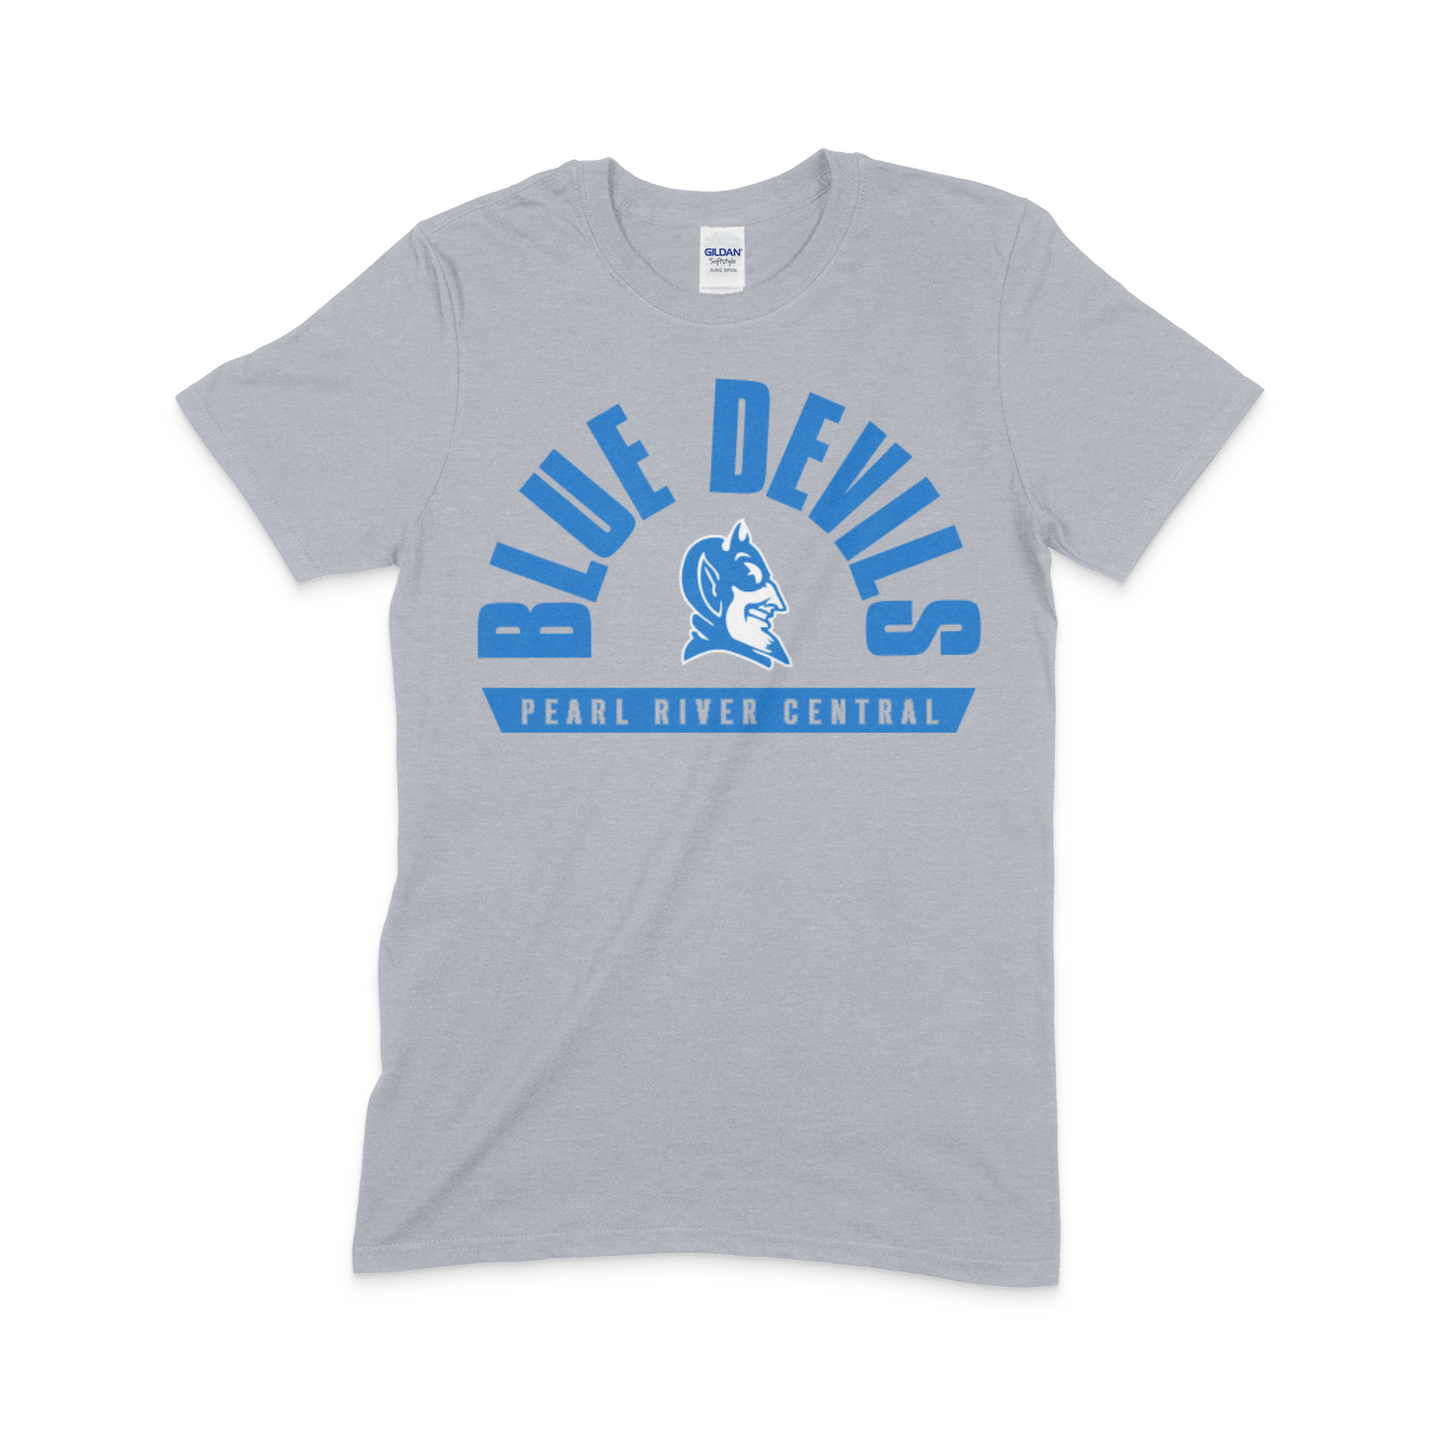 Softstyle Tee - Blue Devils Arch